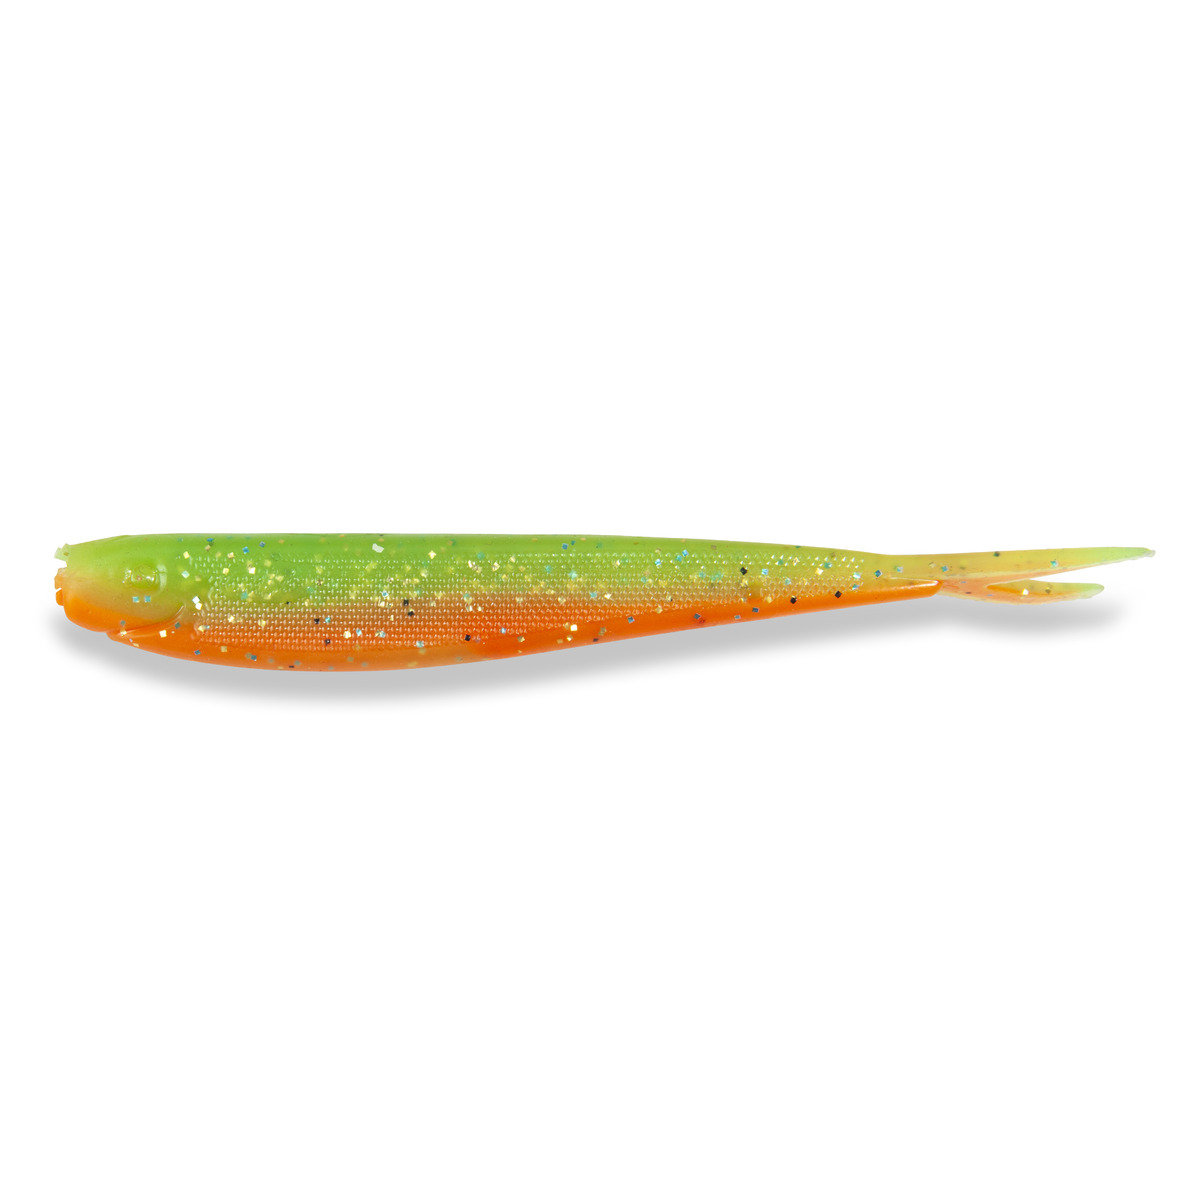 Iron Claw Moby V-tail 19 Cm - 20 TG UV